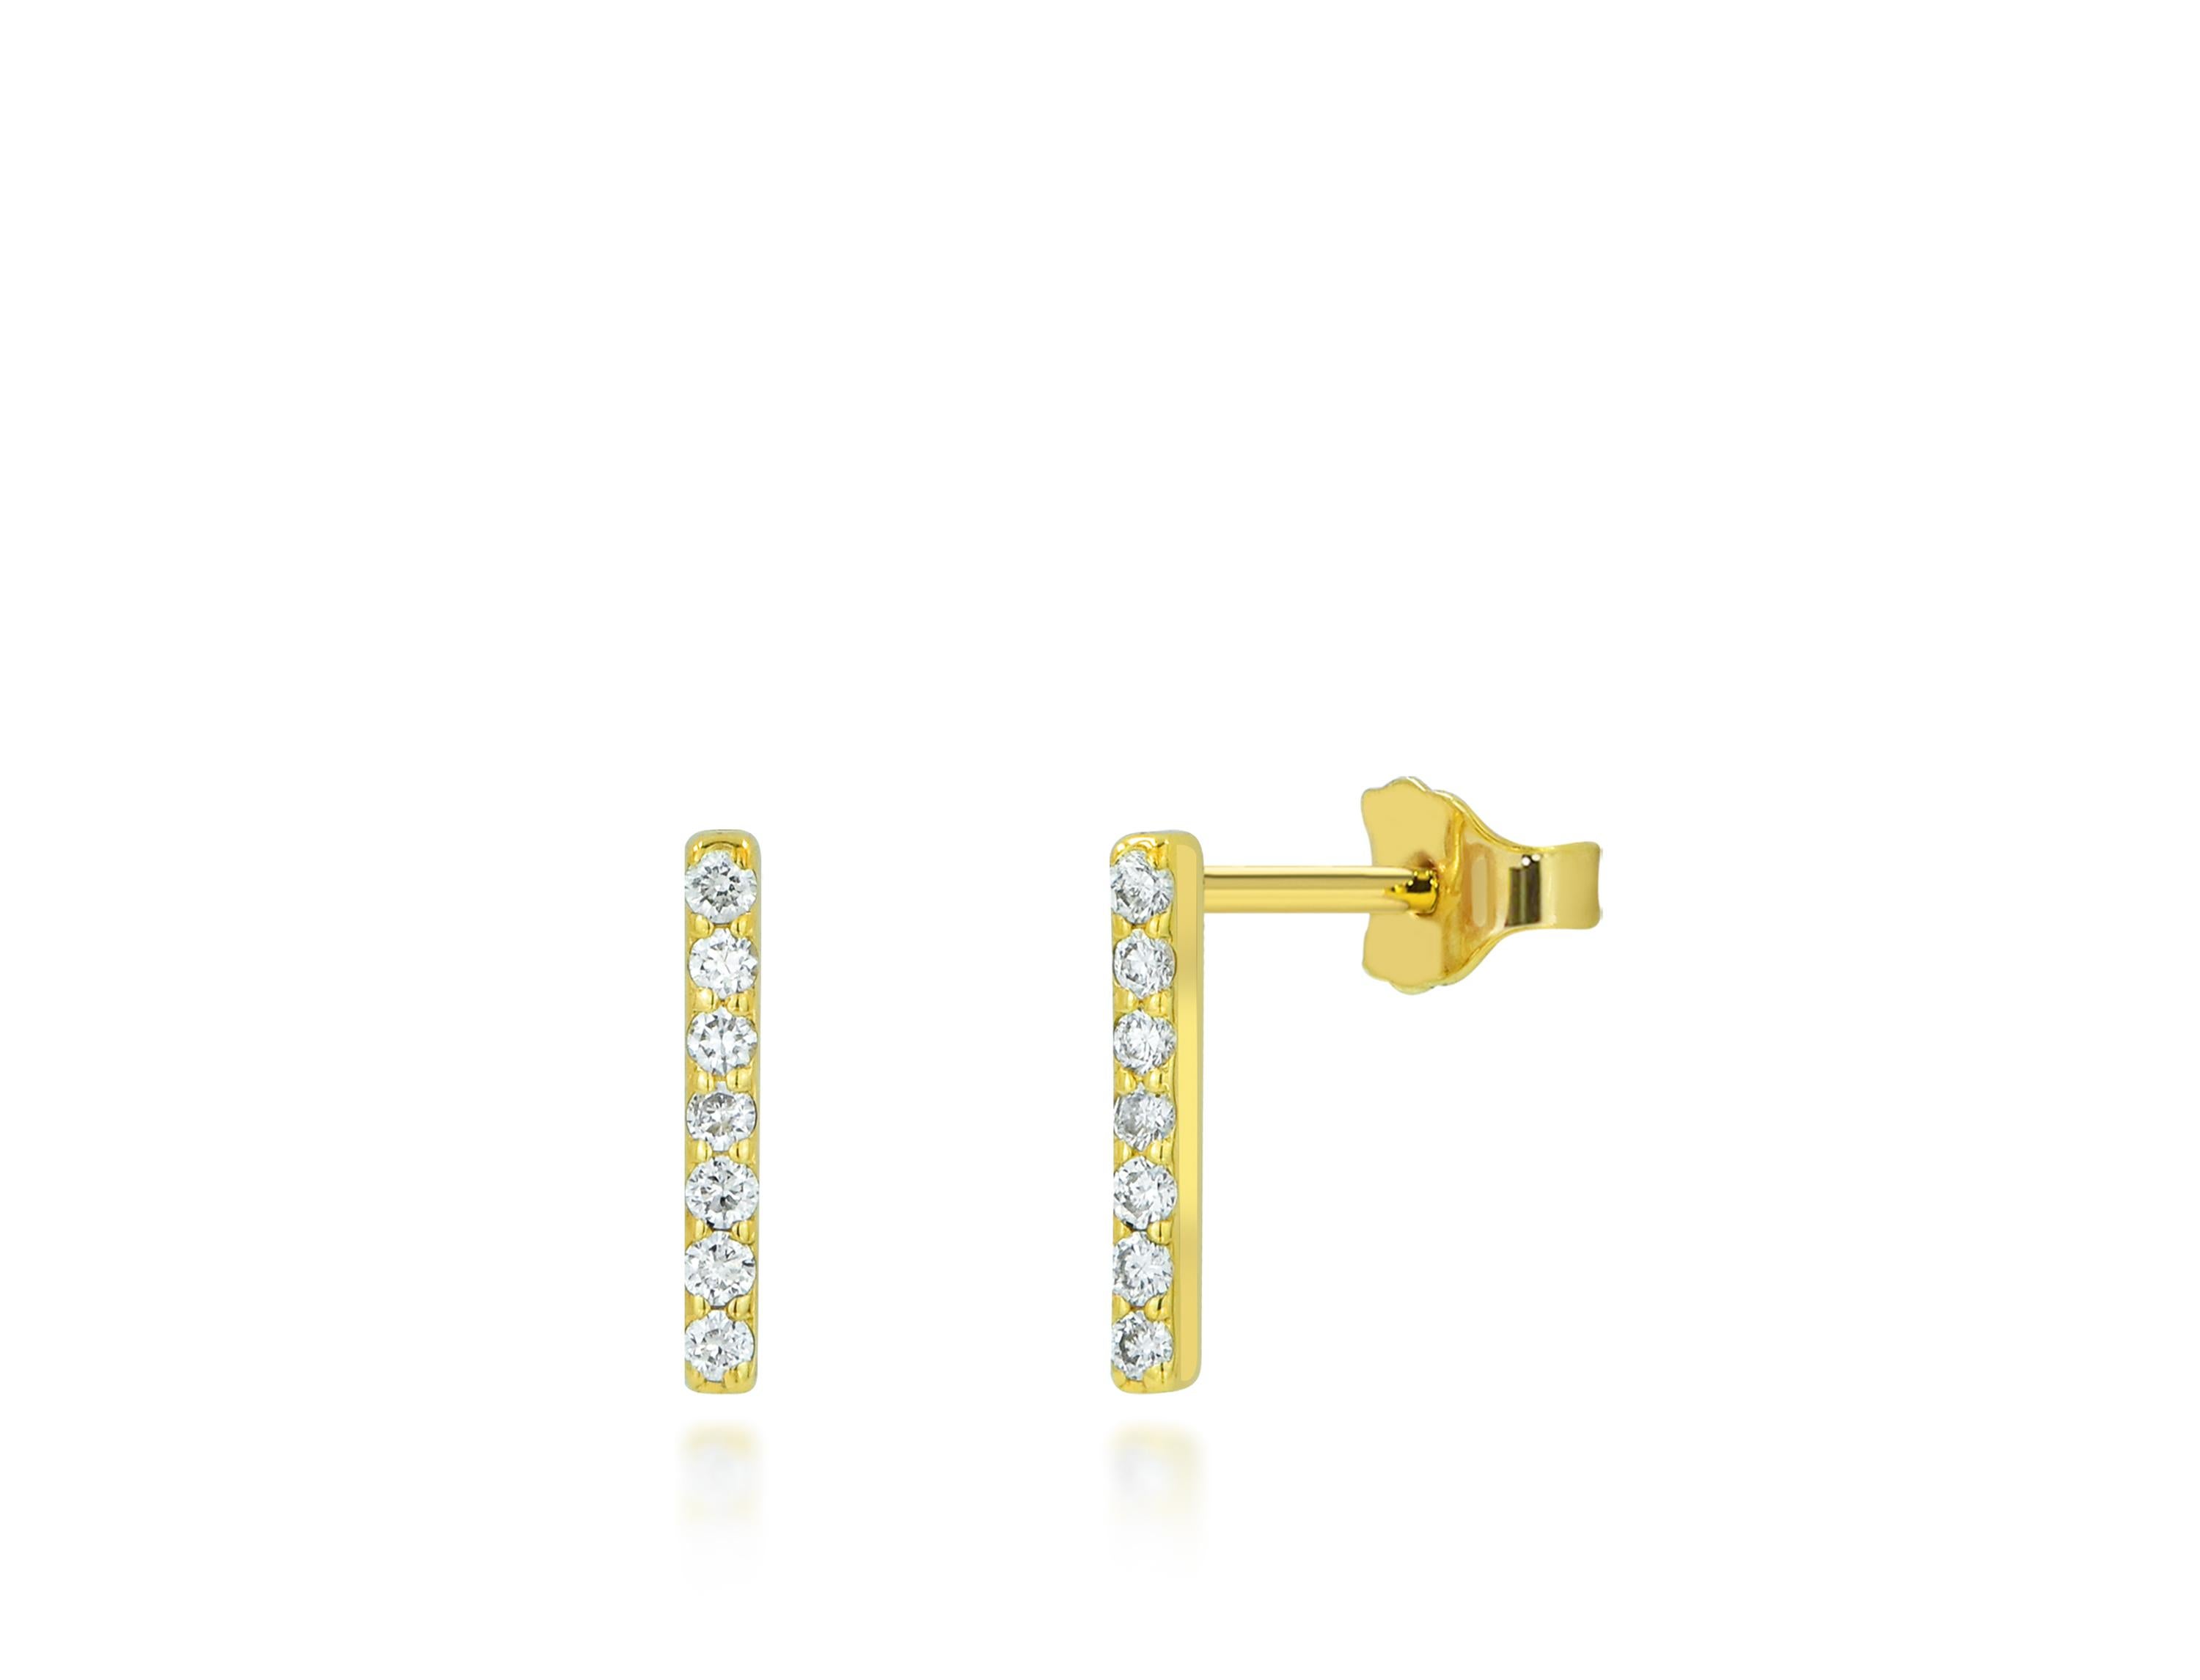 Diamond Bar Stud Earrings in 18k Rose Gold, Yellow Gold, White Gold.

These Dainty Stud Earrings are made of 18k solid gold featuring shiny brilliant round cut natural diamonds set by master setter in our studio. Simple but unique, elegant and easy